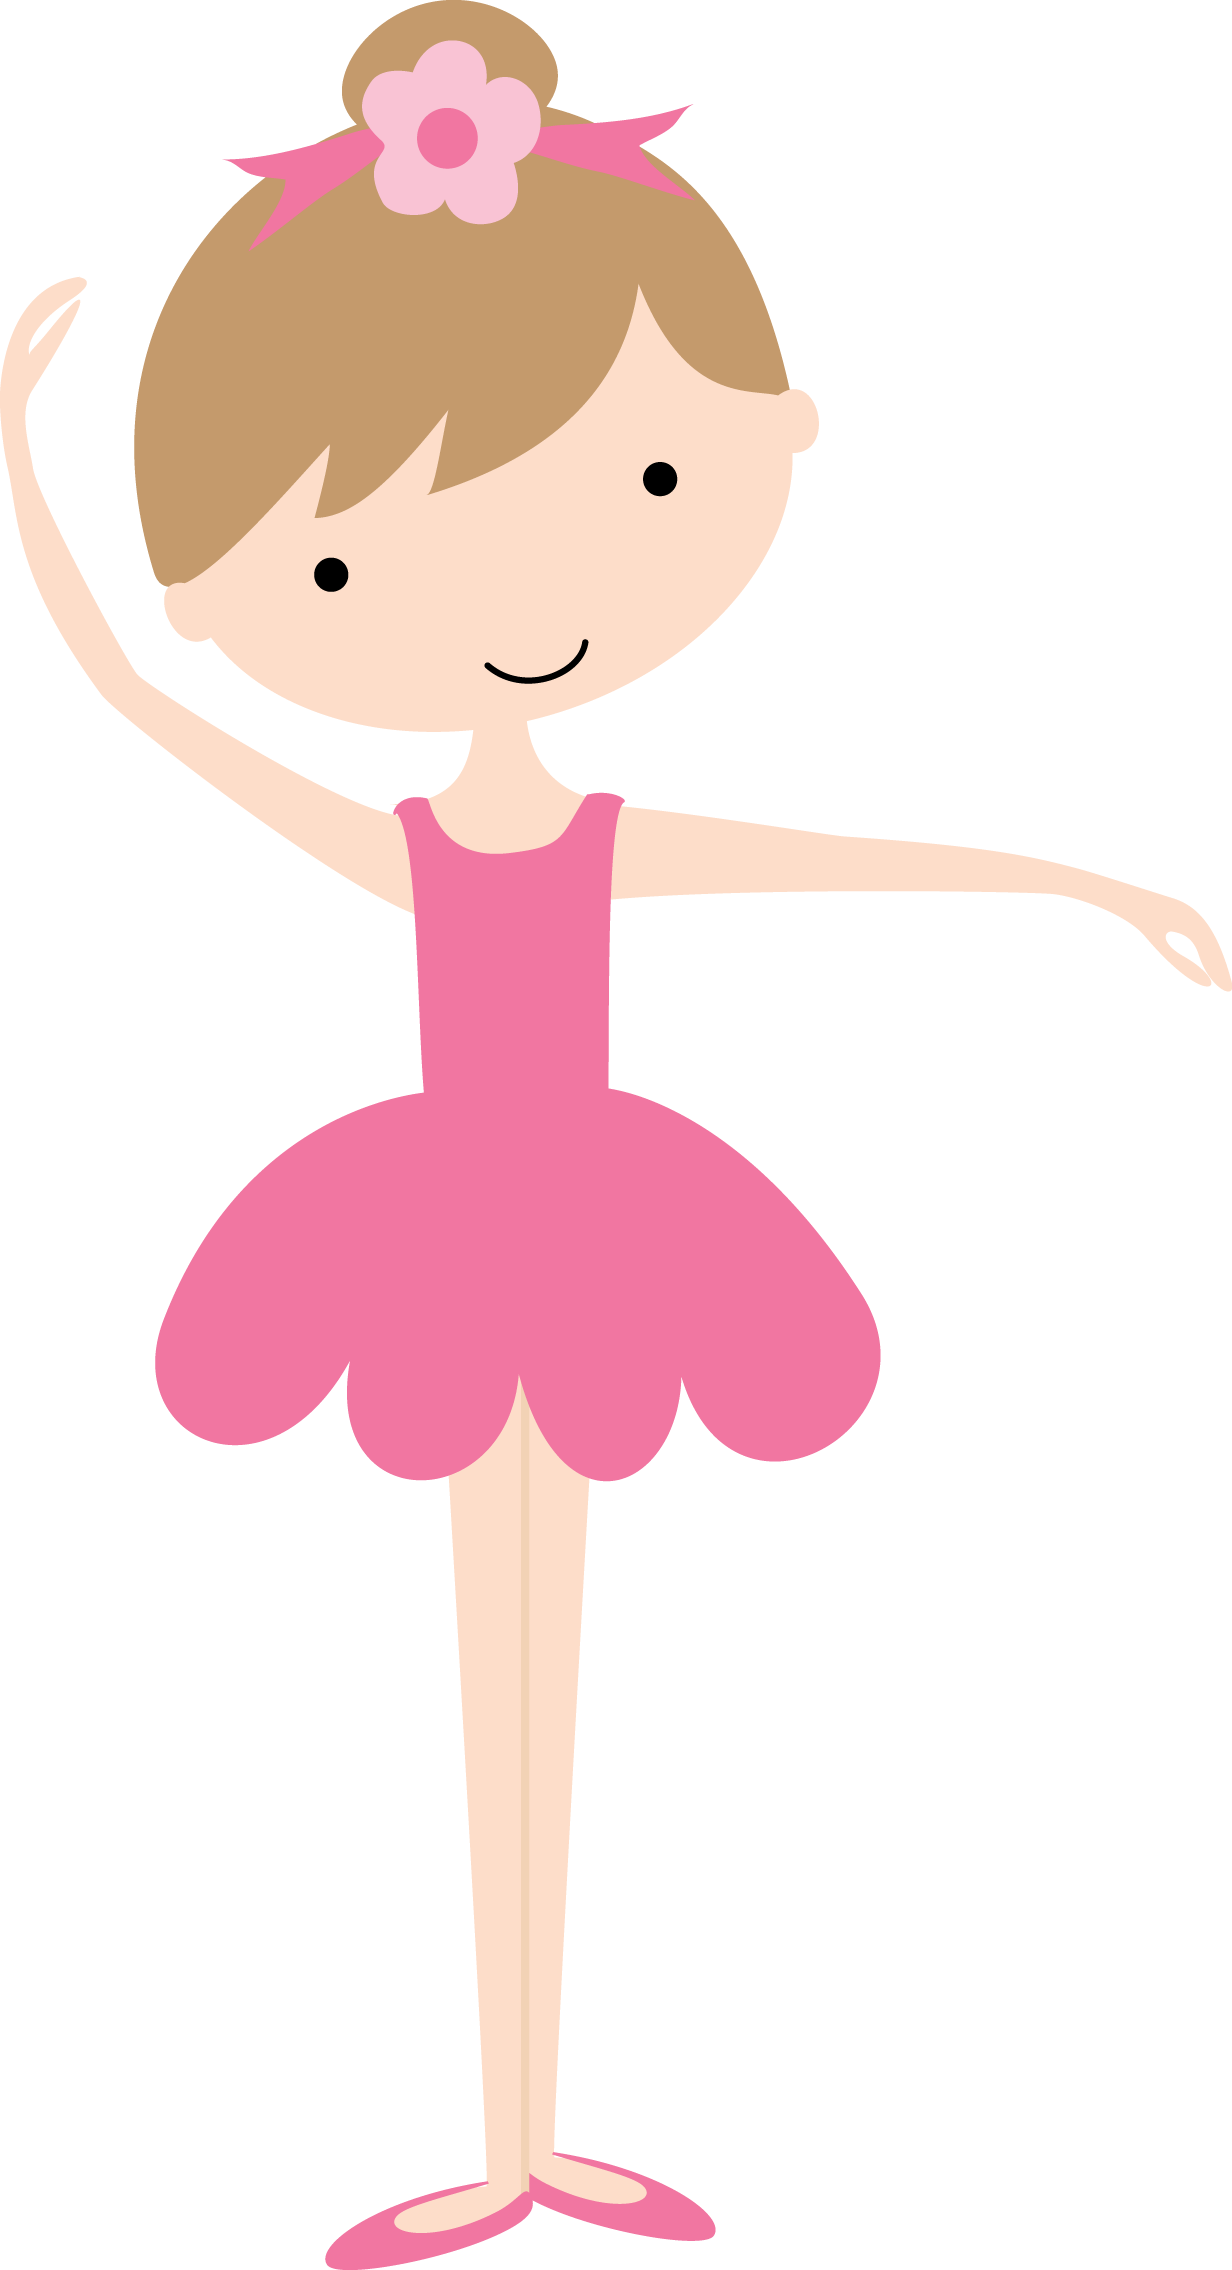 Ballerina cliparts free download. Exercising clipart cute